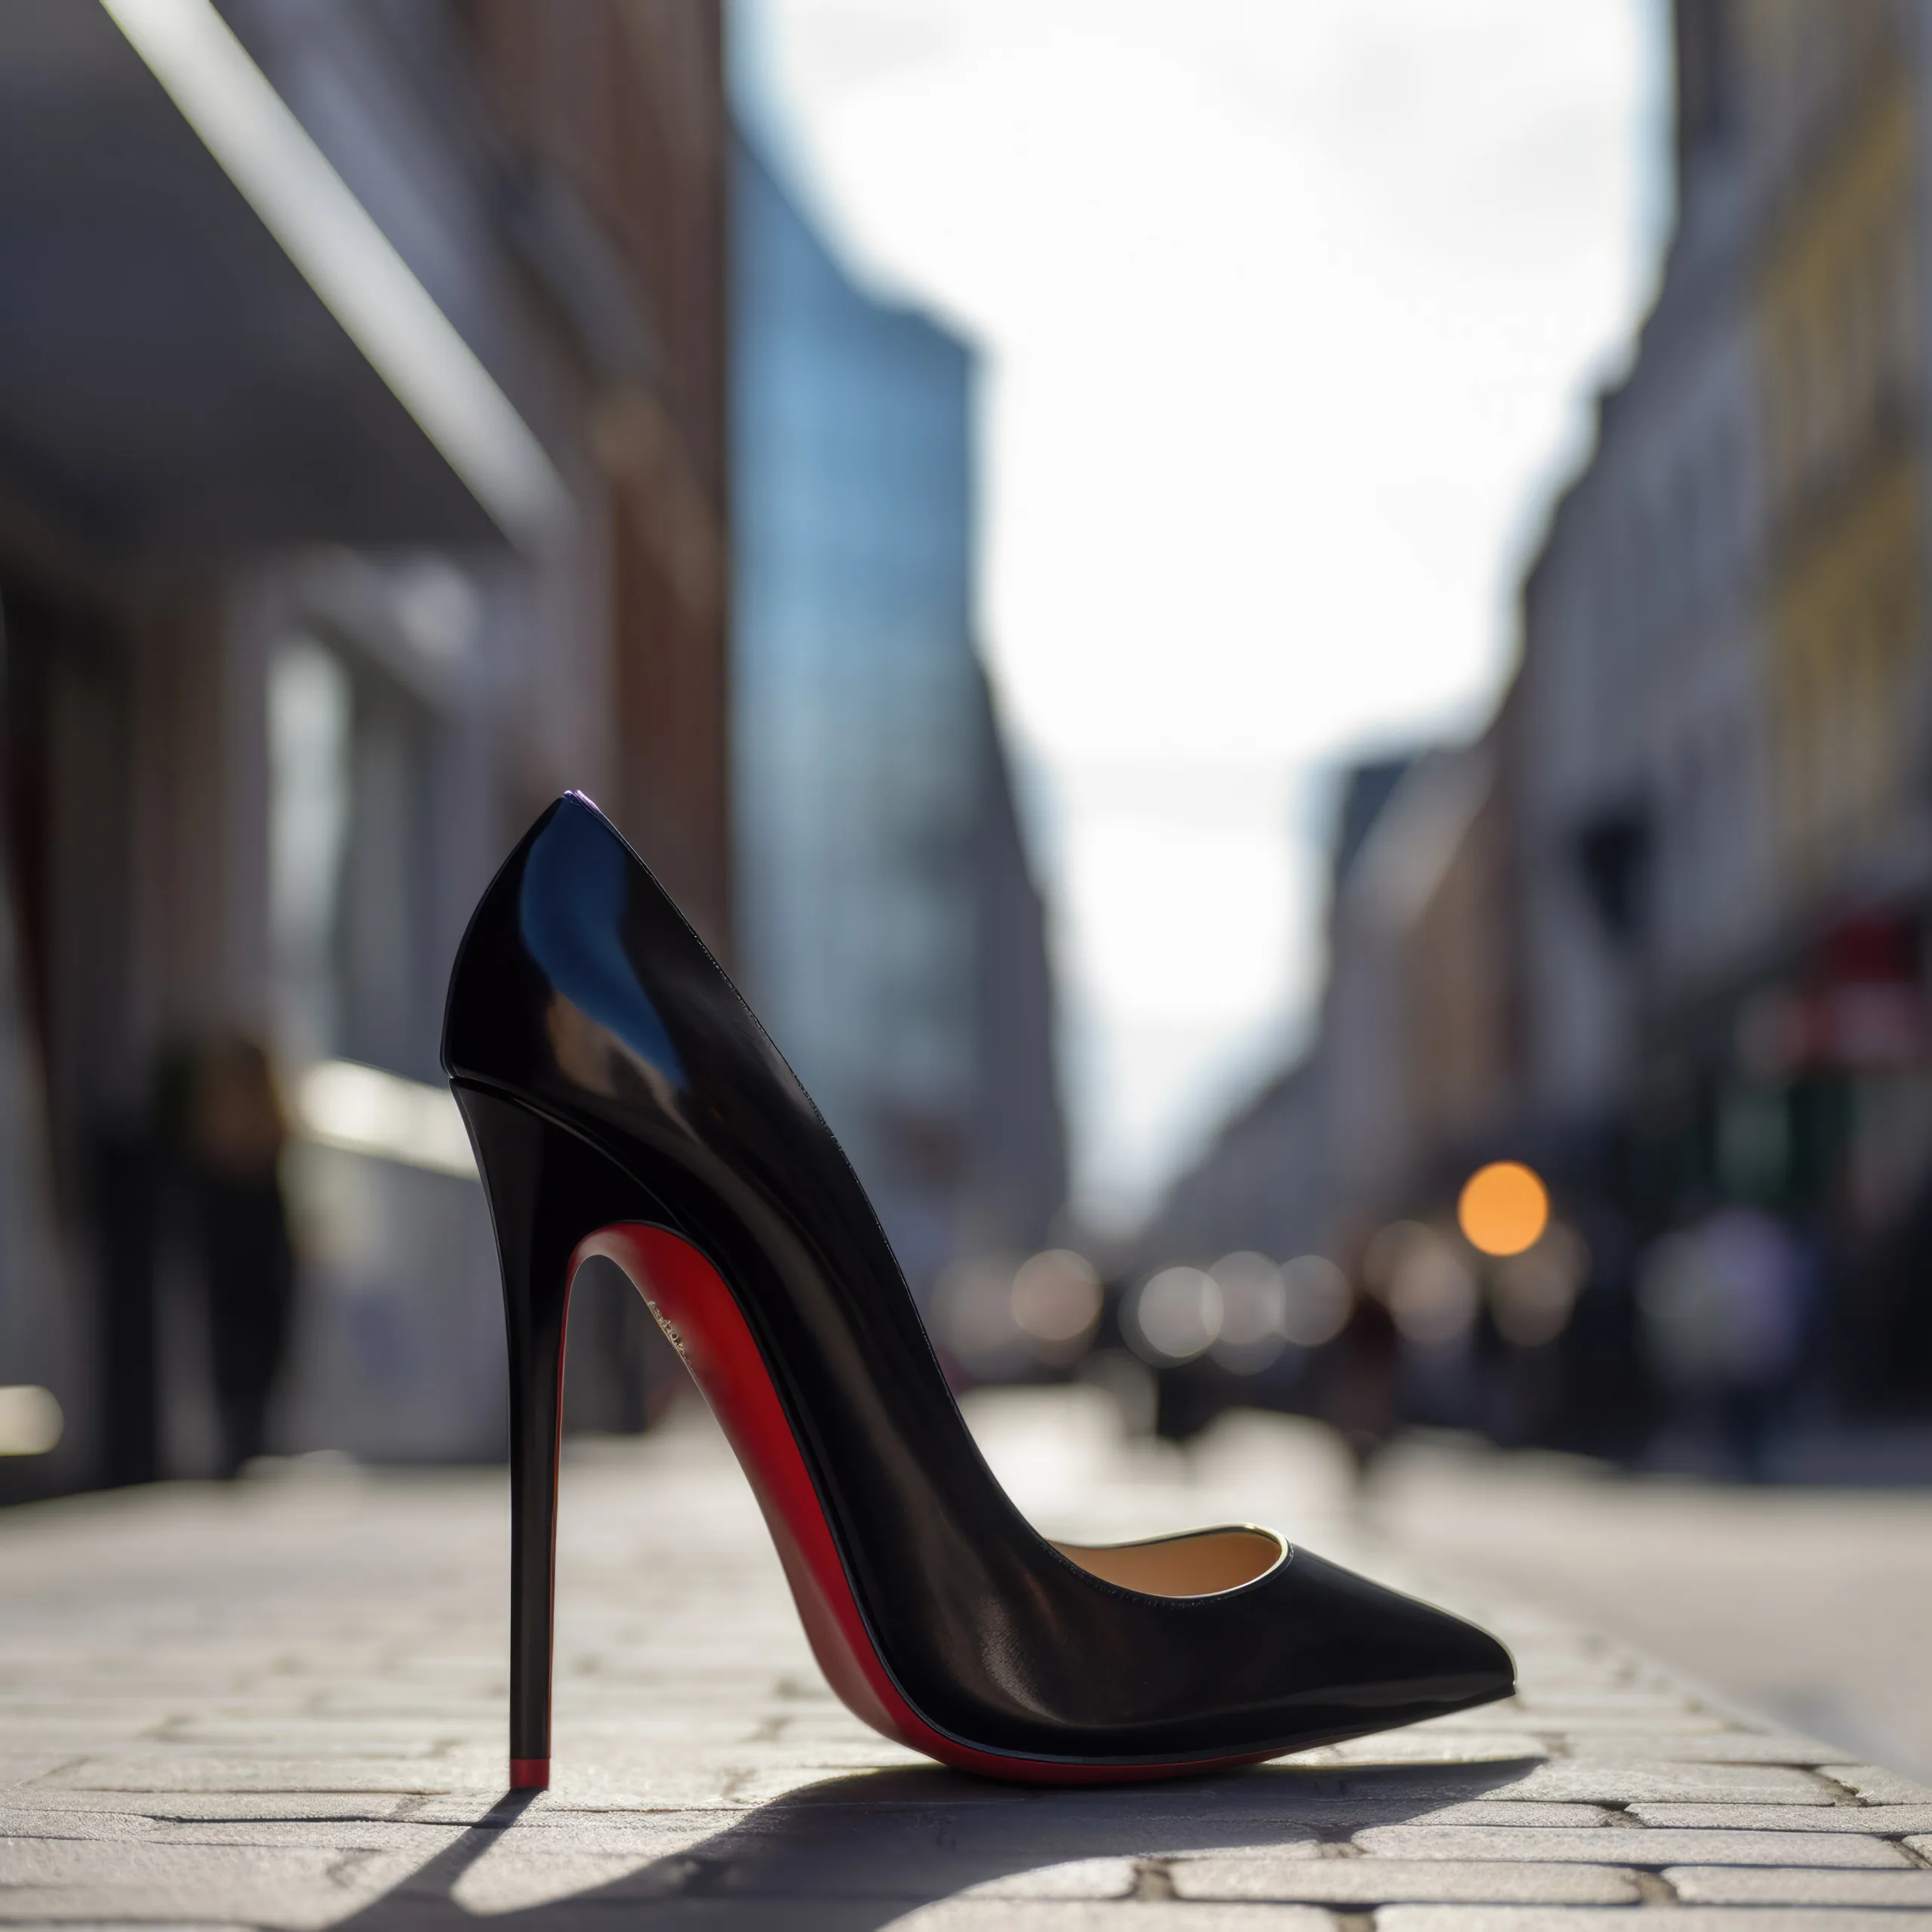 Plush Wedding at Orchardleigh House: Christian louboutin high heels on a city street.